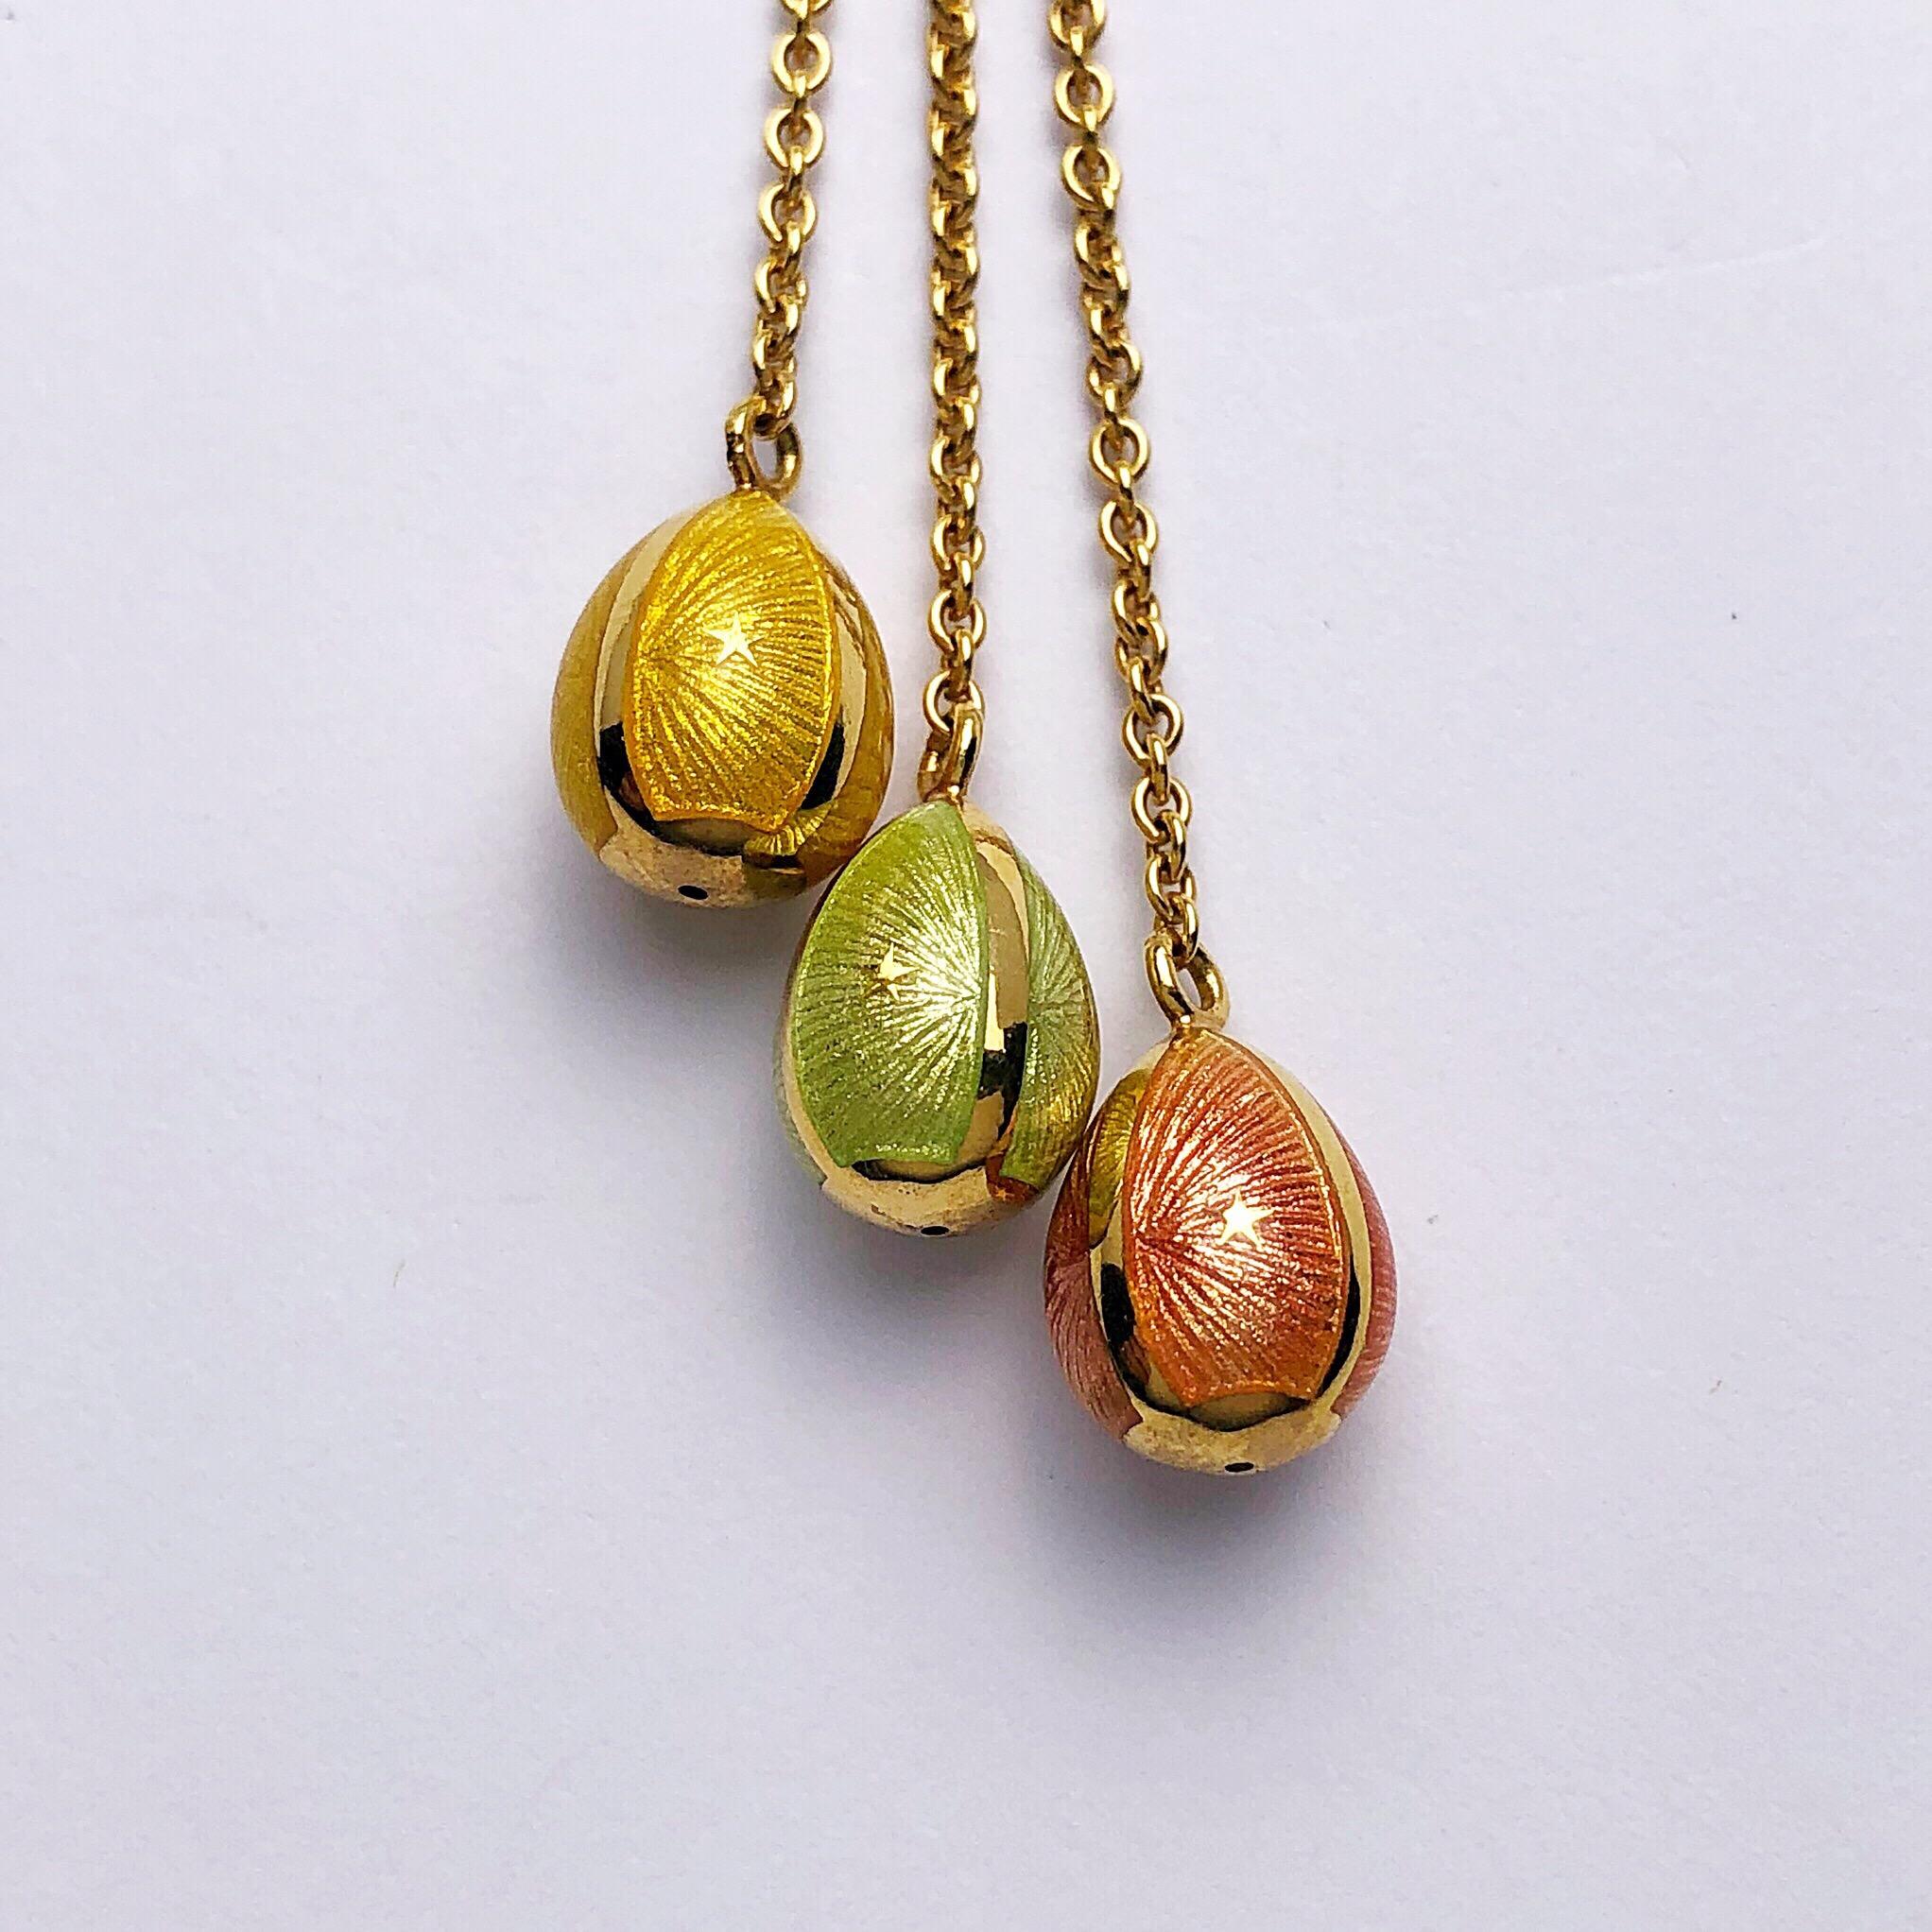 This modern 18 karat yellow gold Faberge pendant by Victor Mayer features 3 hanging eggs in peach, yellow and mint guilloche enamel. The enamel eggs are hanging from an 18 karat white gold and diamond open circle. The pendants eggs were crafted in